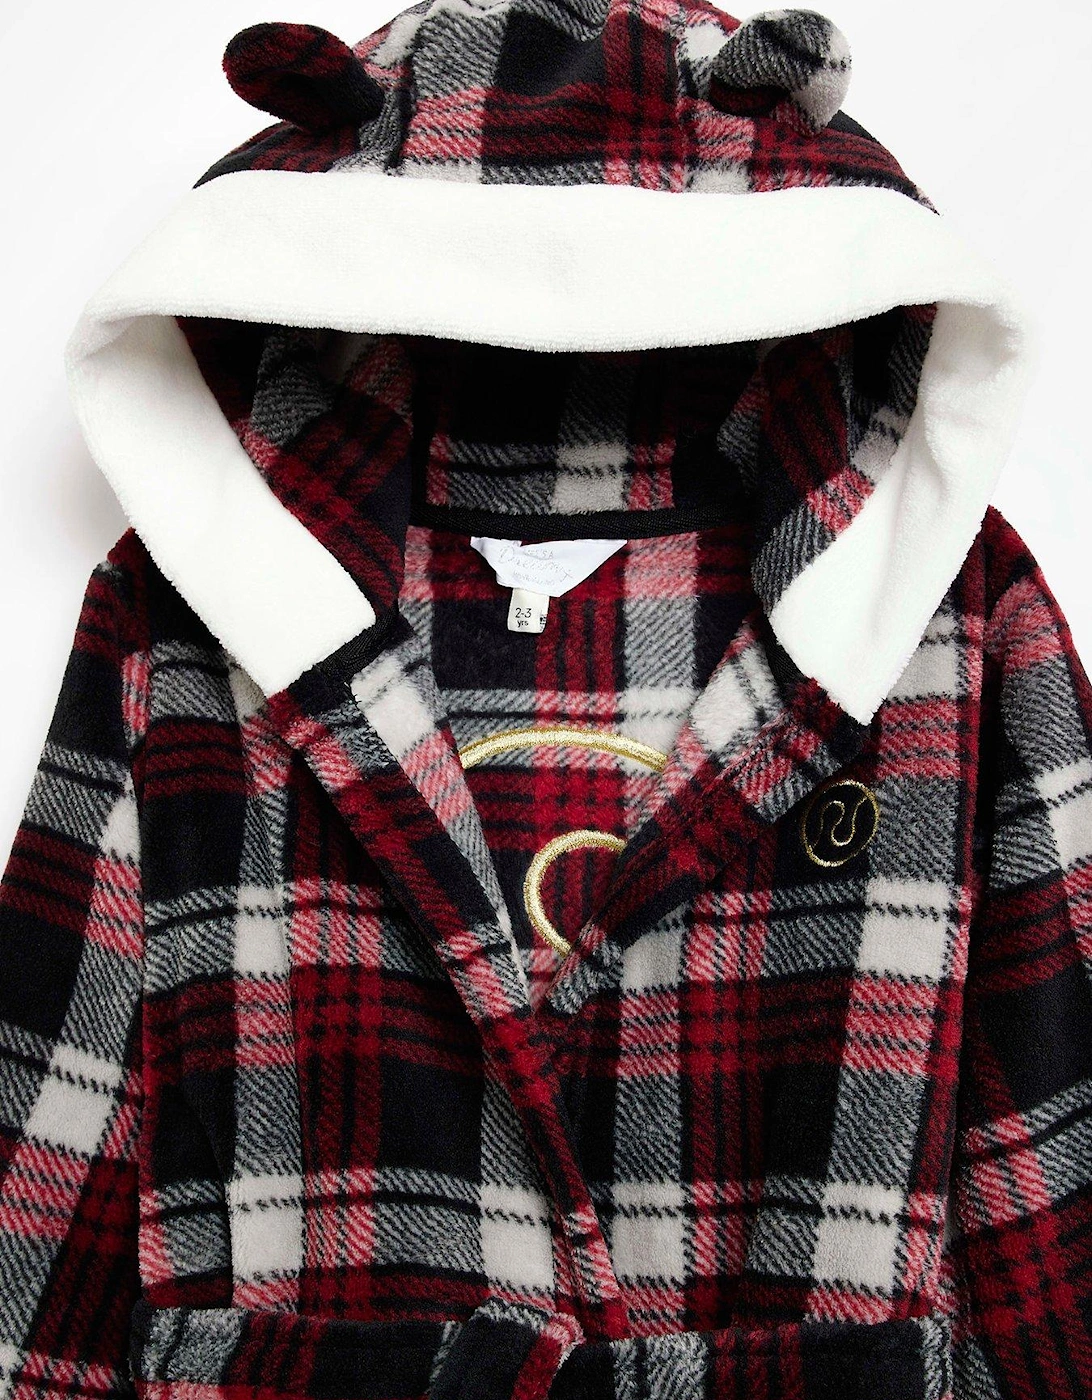 Mini Girls Christmas Check Dressing Gown - Red